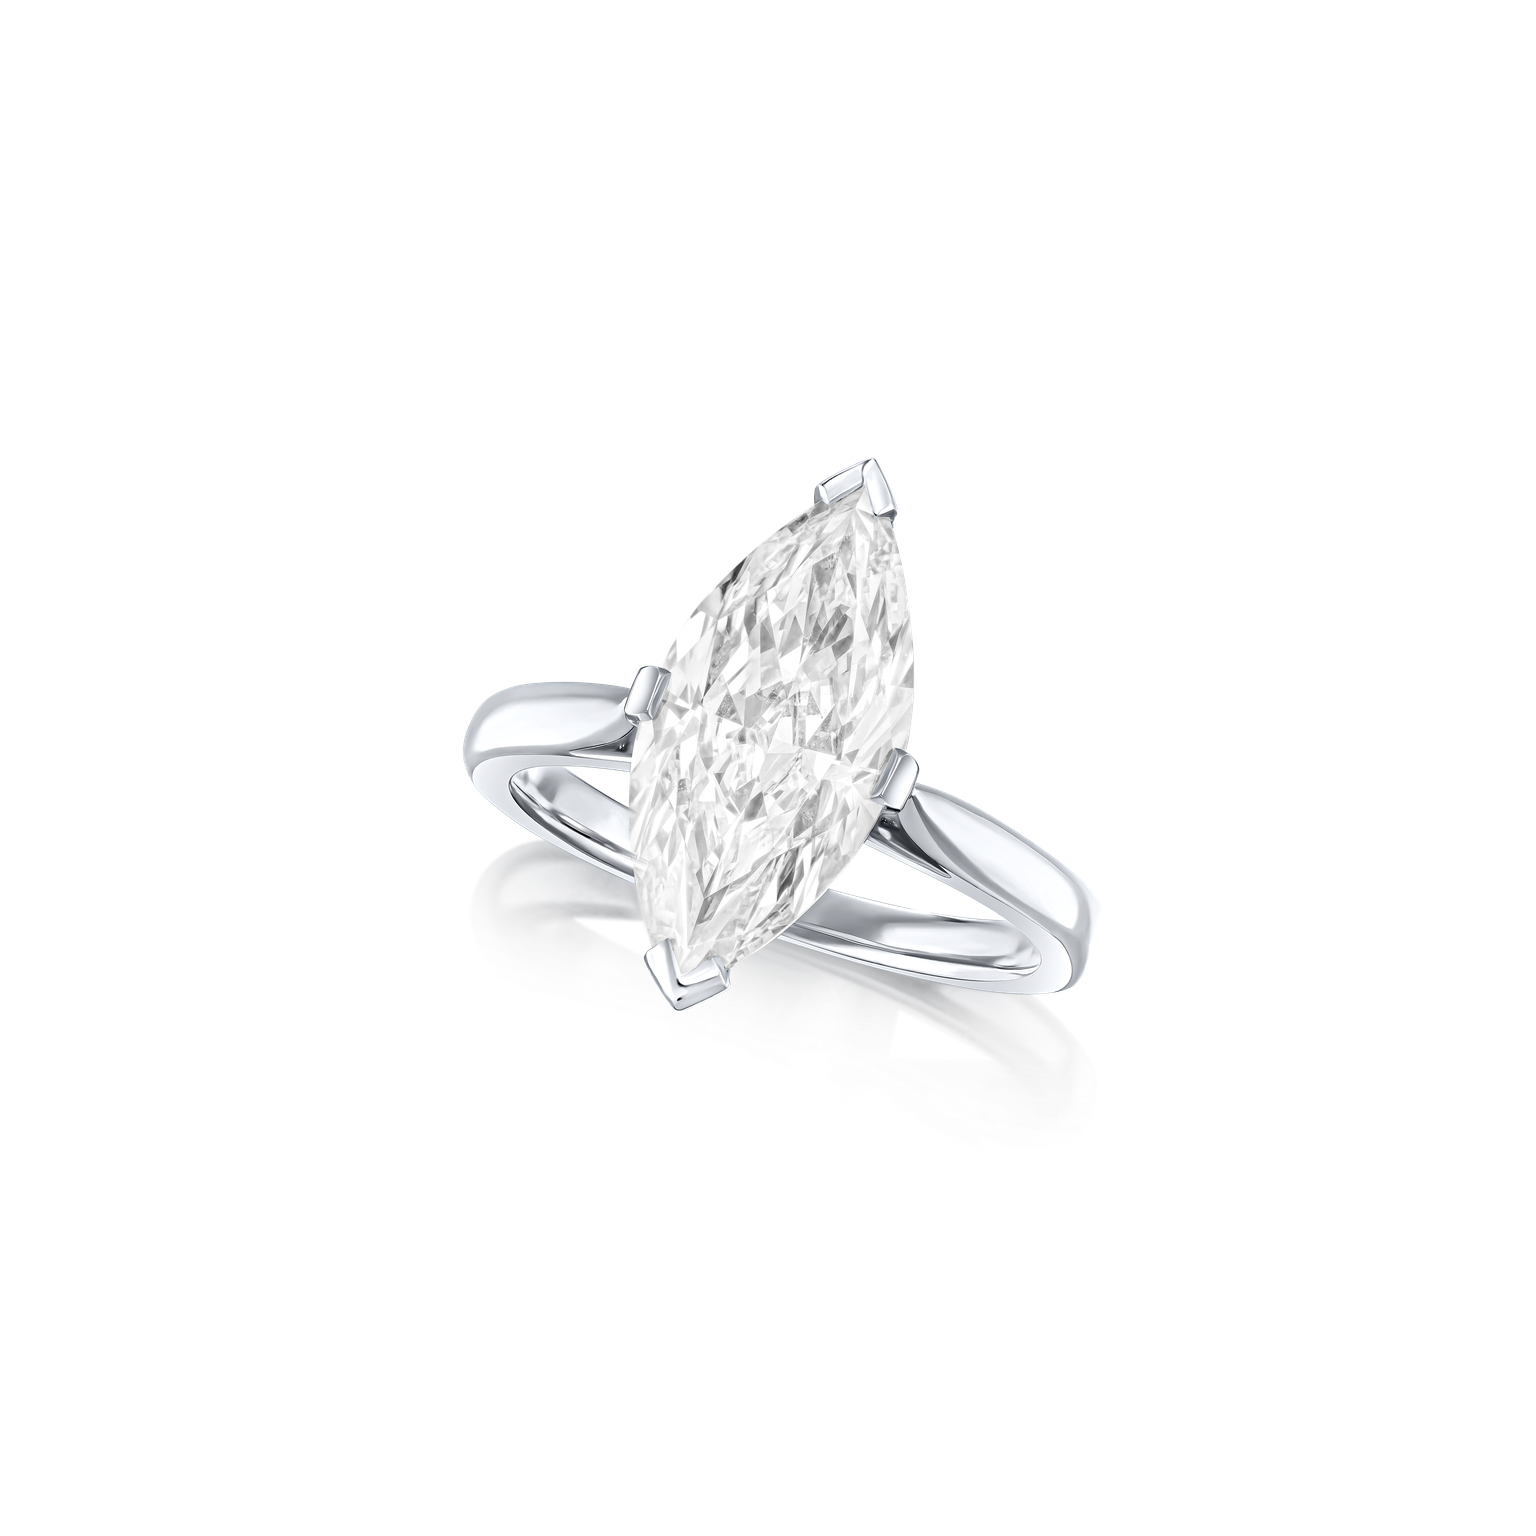 3.06cts D-Colour Marquise-Cut Diamond Ring